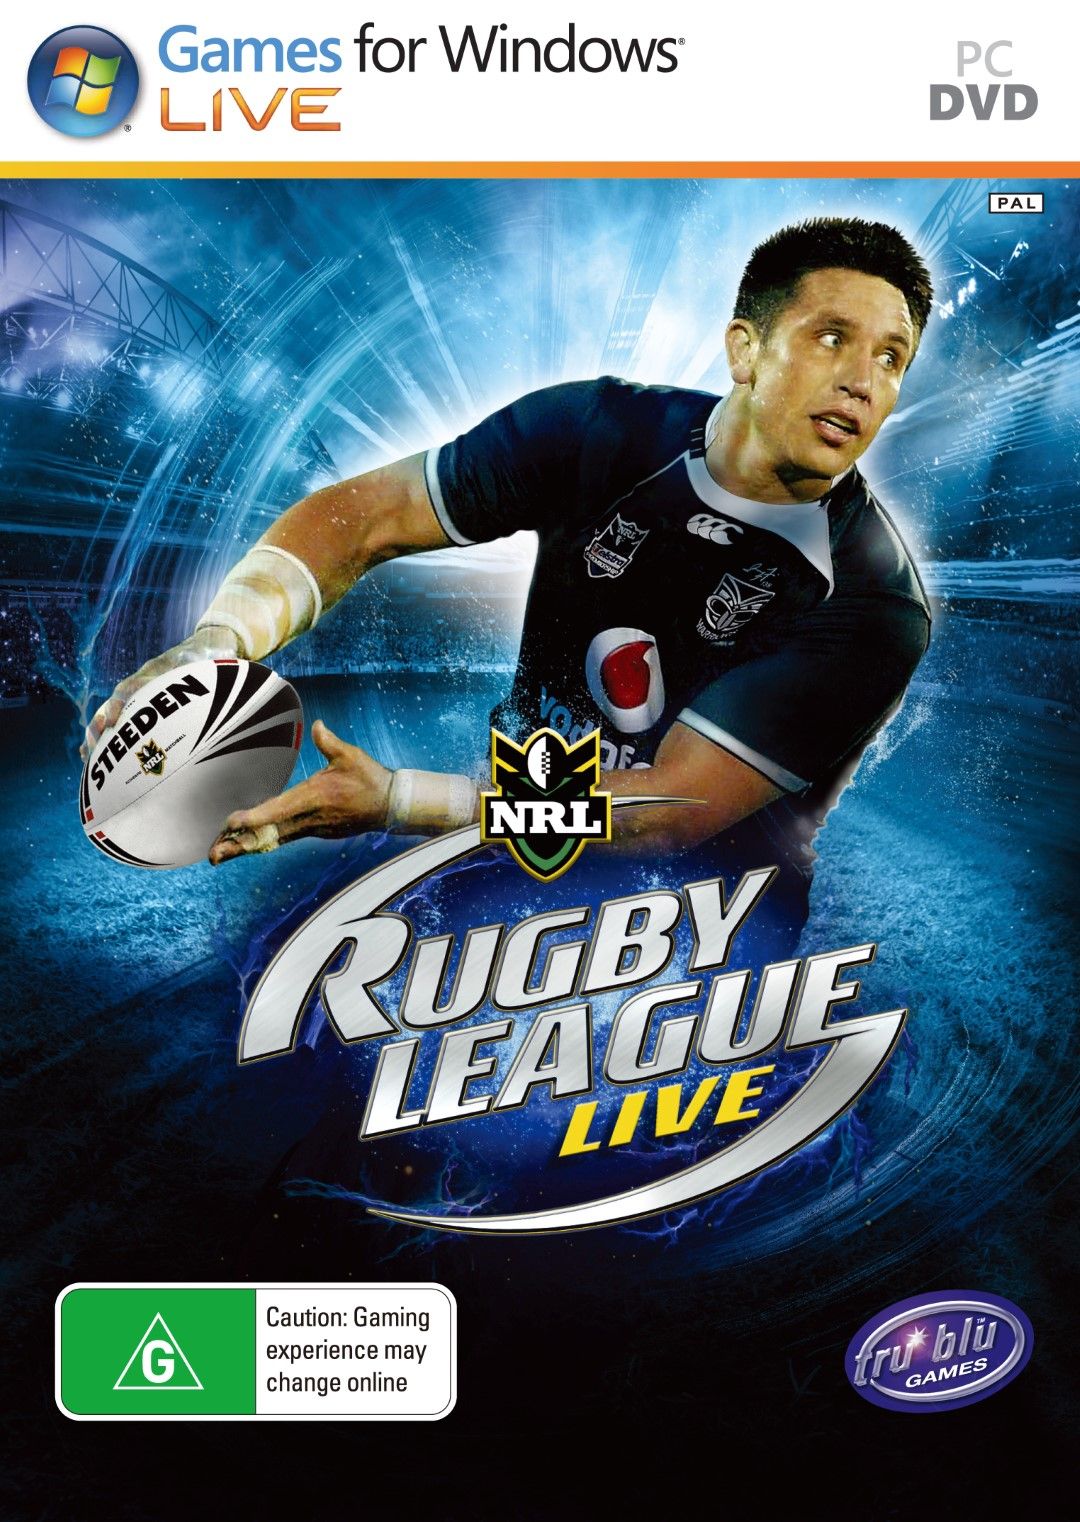 Rugby League Live (Preowned) escapeauthority